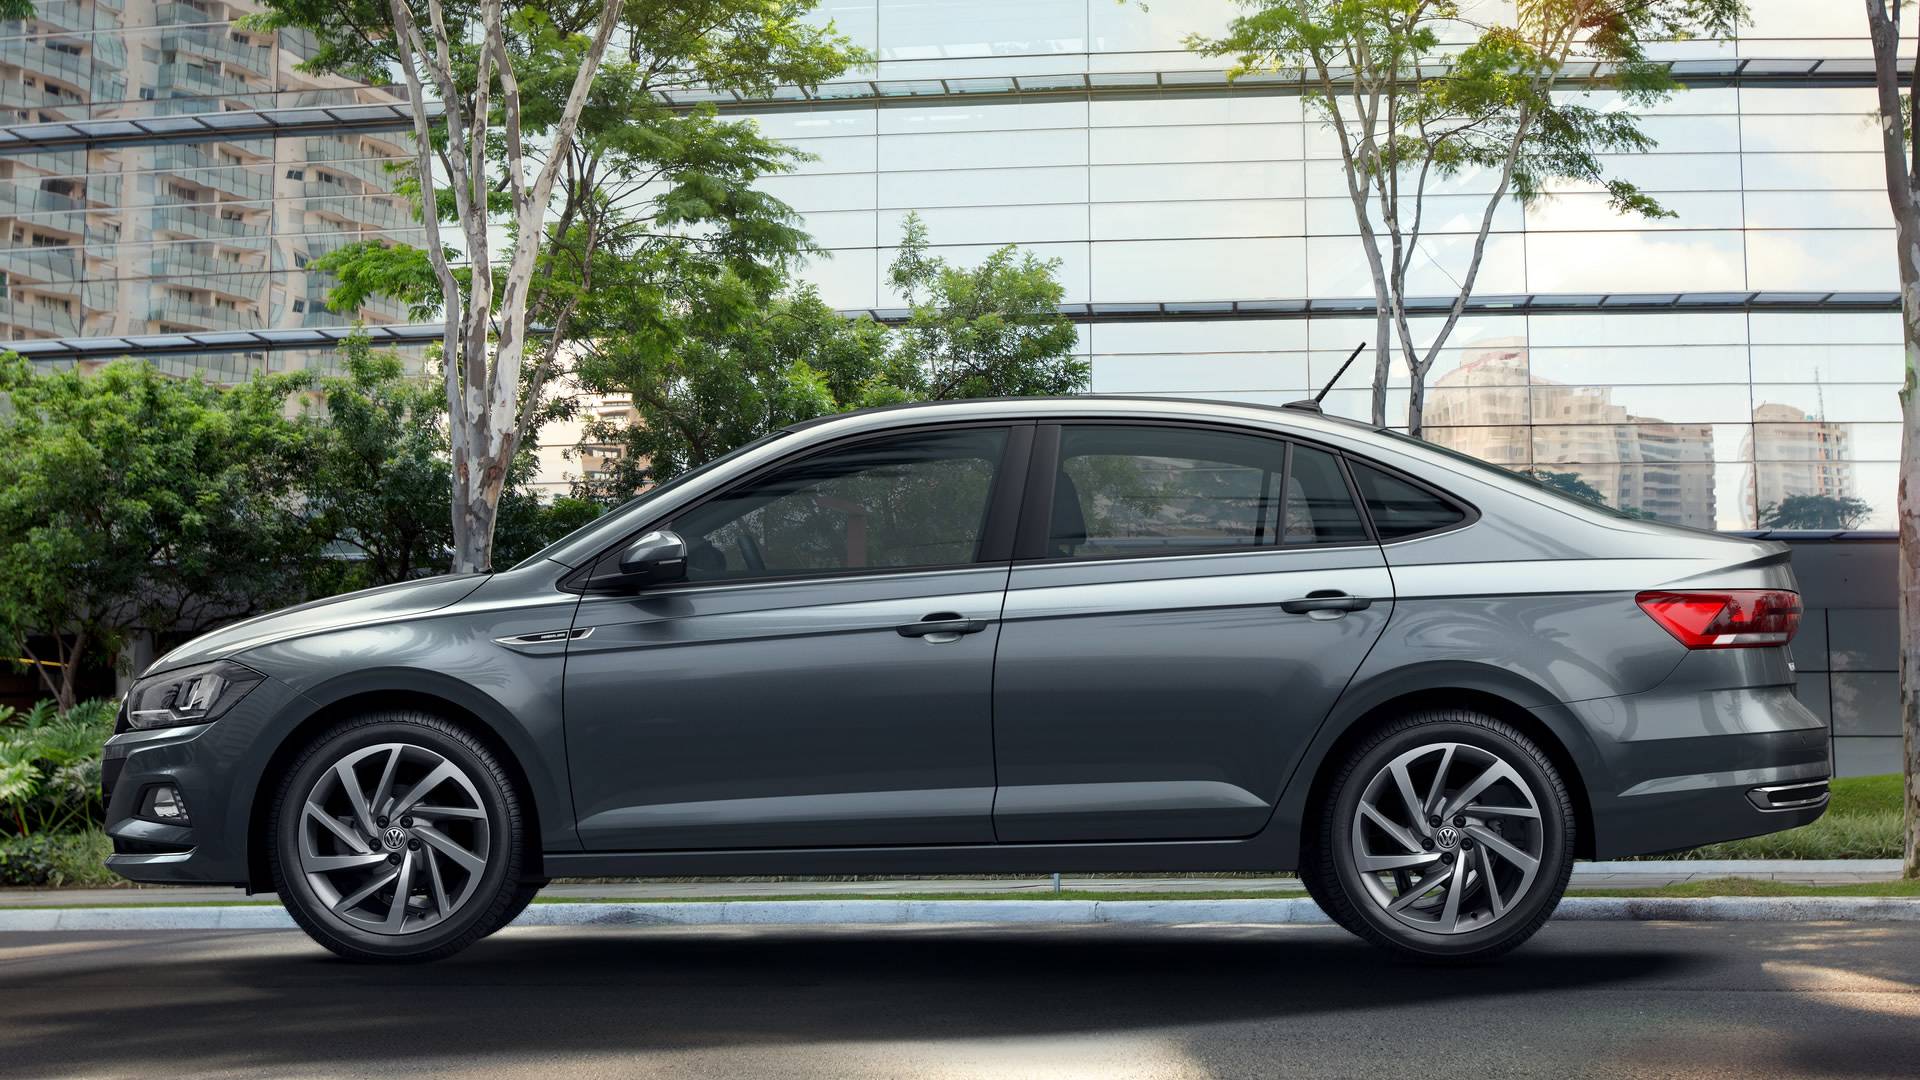 Volkswagen Next Generation Vento (VIRTUS) India Launch Date, Price, Specifications - Mody Group